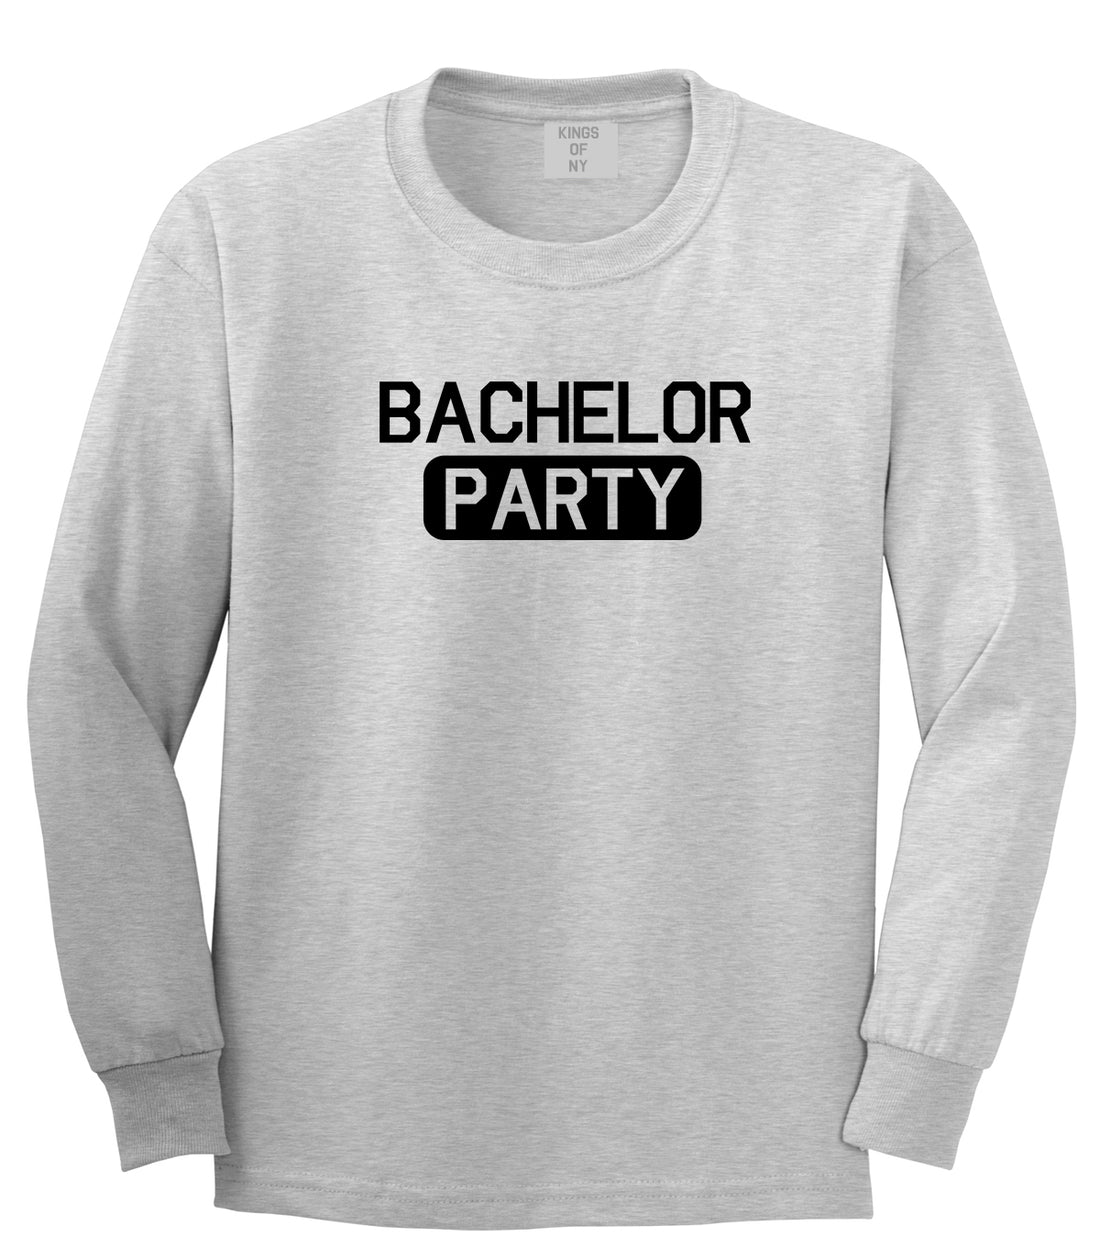 Bachelor Party Grey Long Sleeve T-Shirt by Kings Of NY